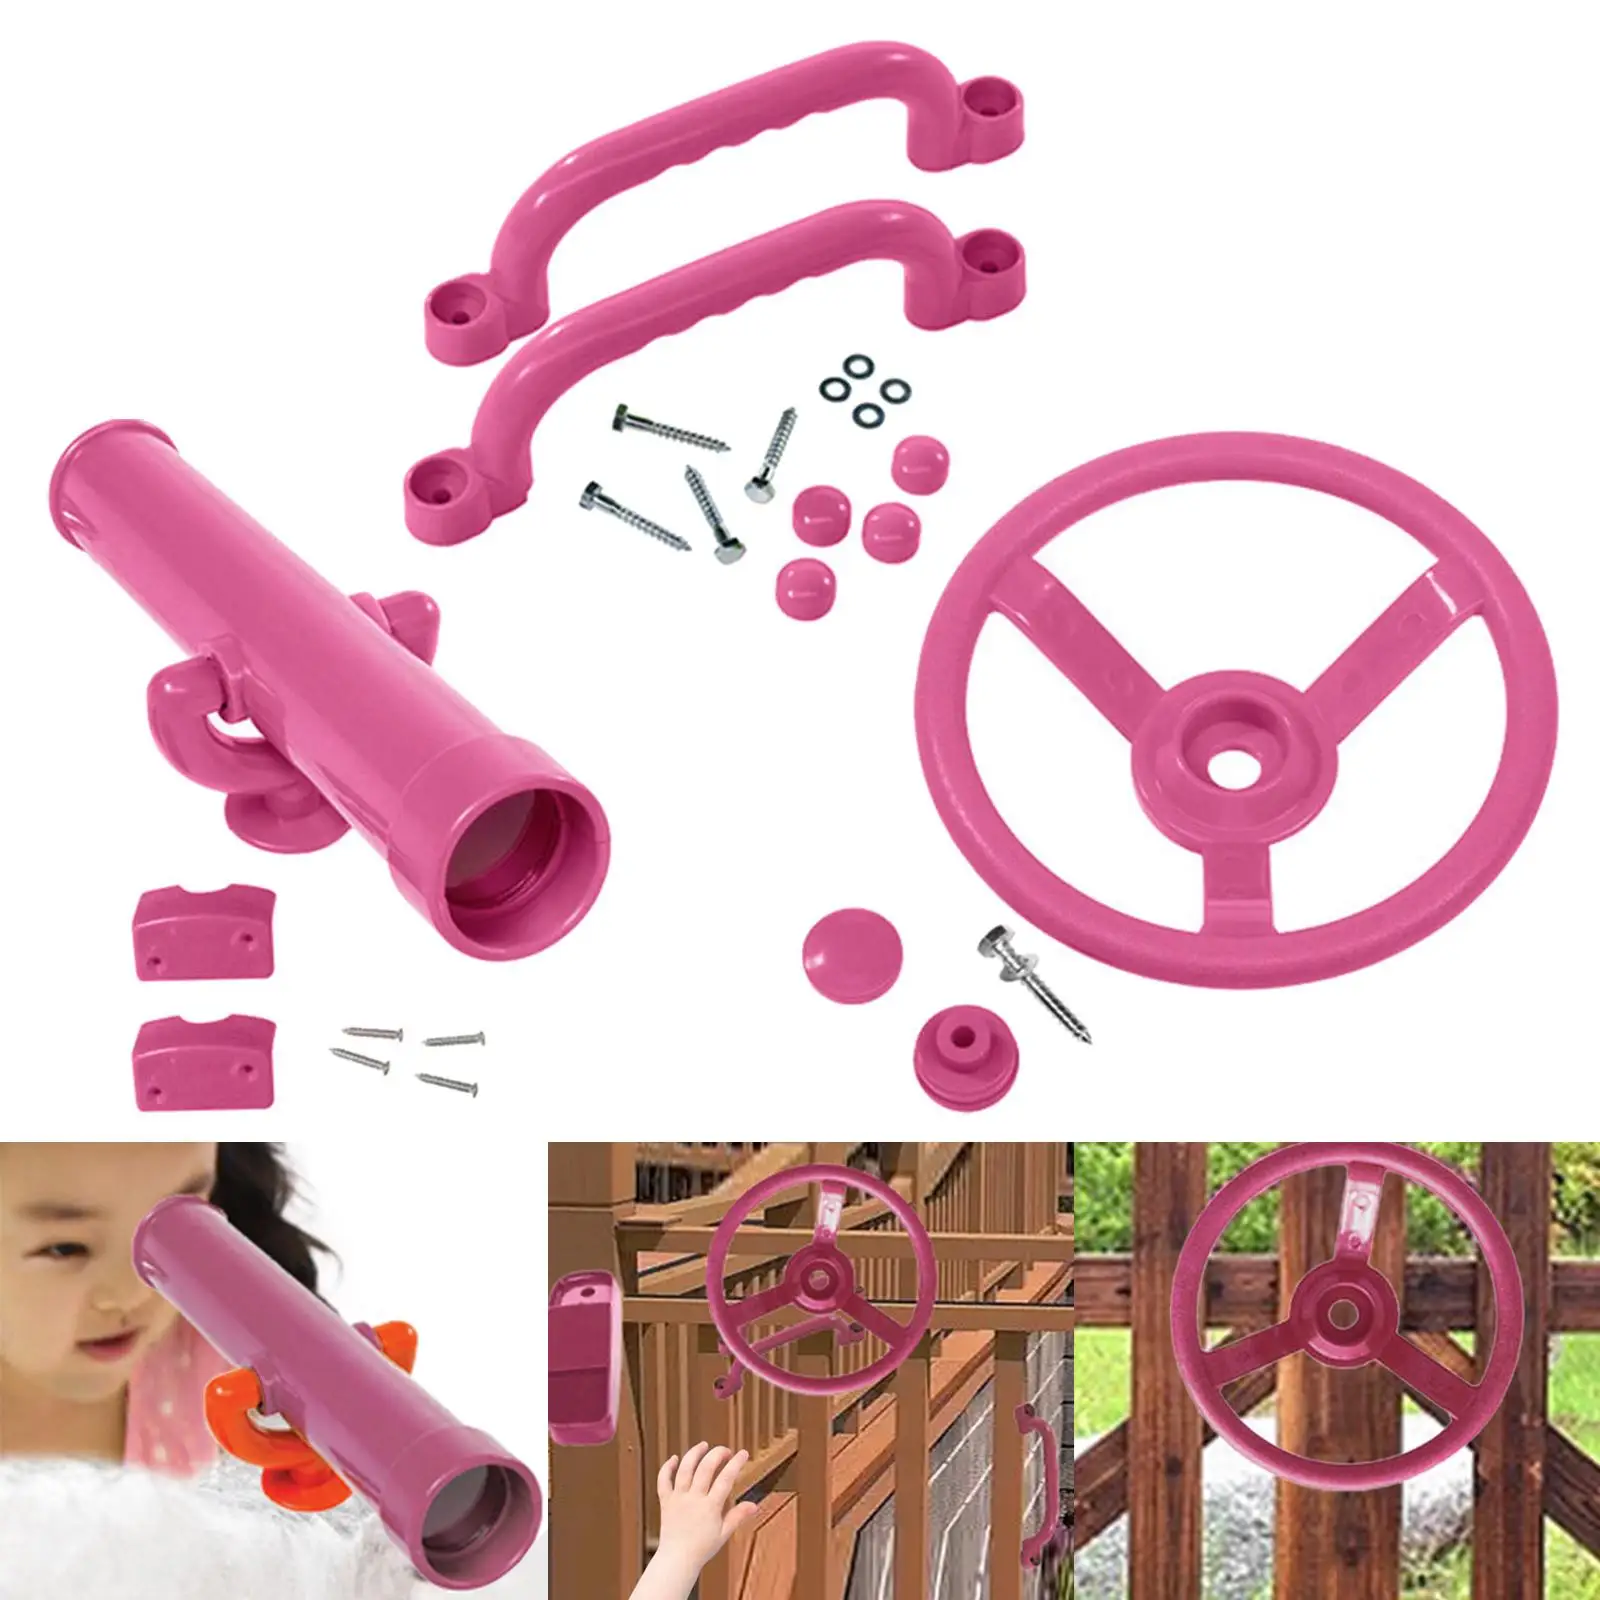 Playground Accessories Pink Set Pirate Ship Parts Valentines Day Gifts for Treehouse Jungle Gym Backyard Playhouse Attachments